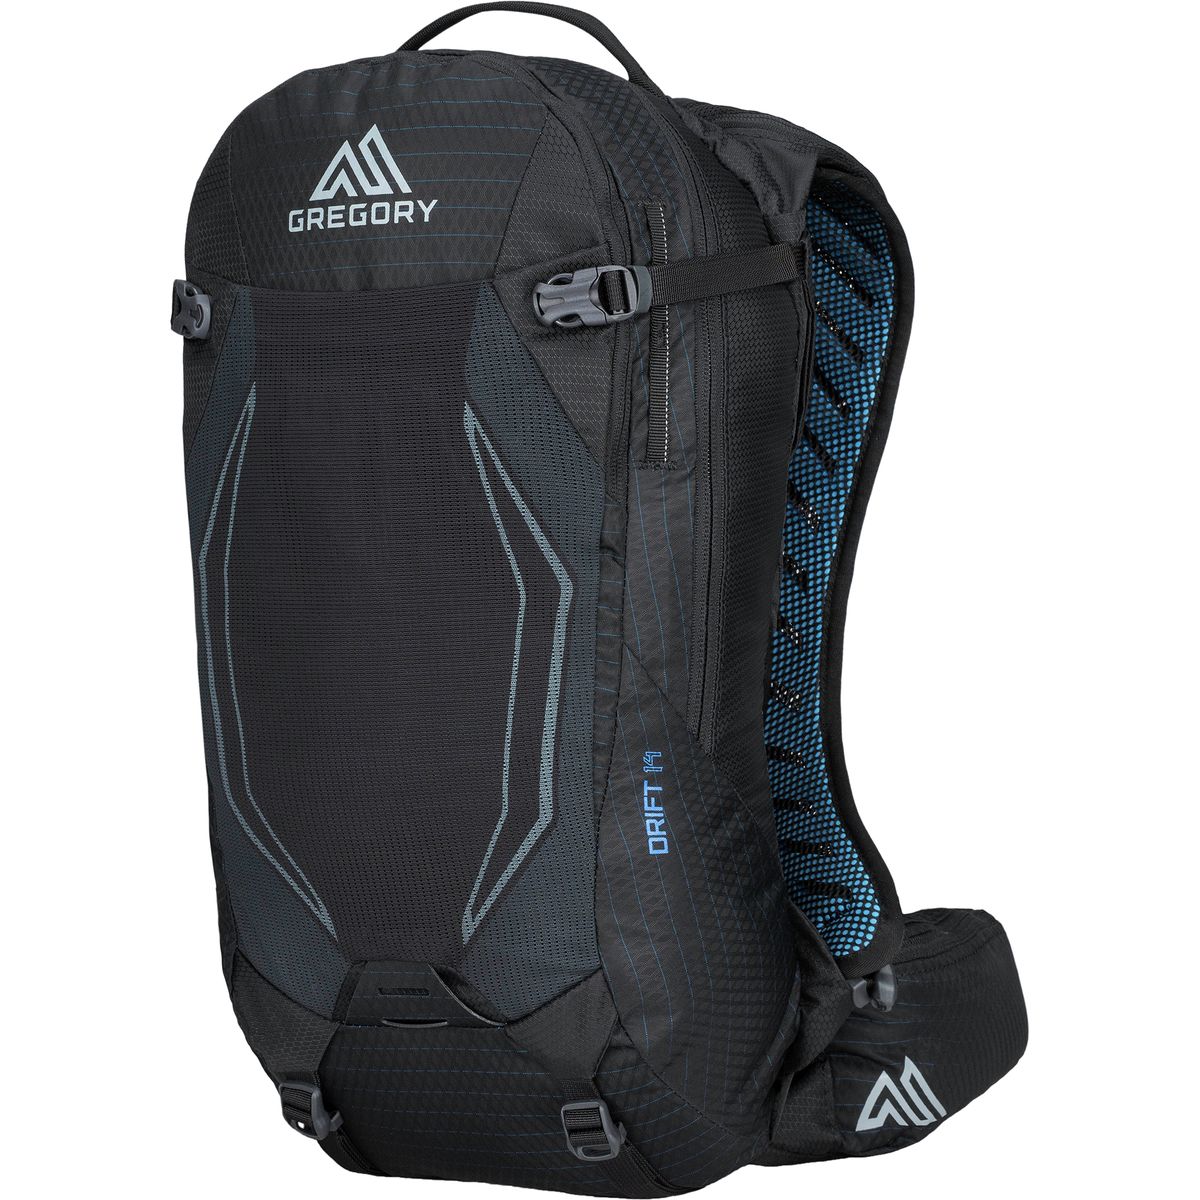 Gregory Drift 14 Hydration Pack 854cu in